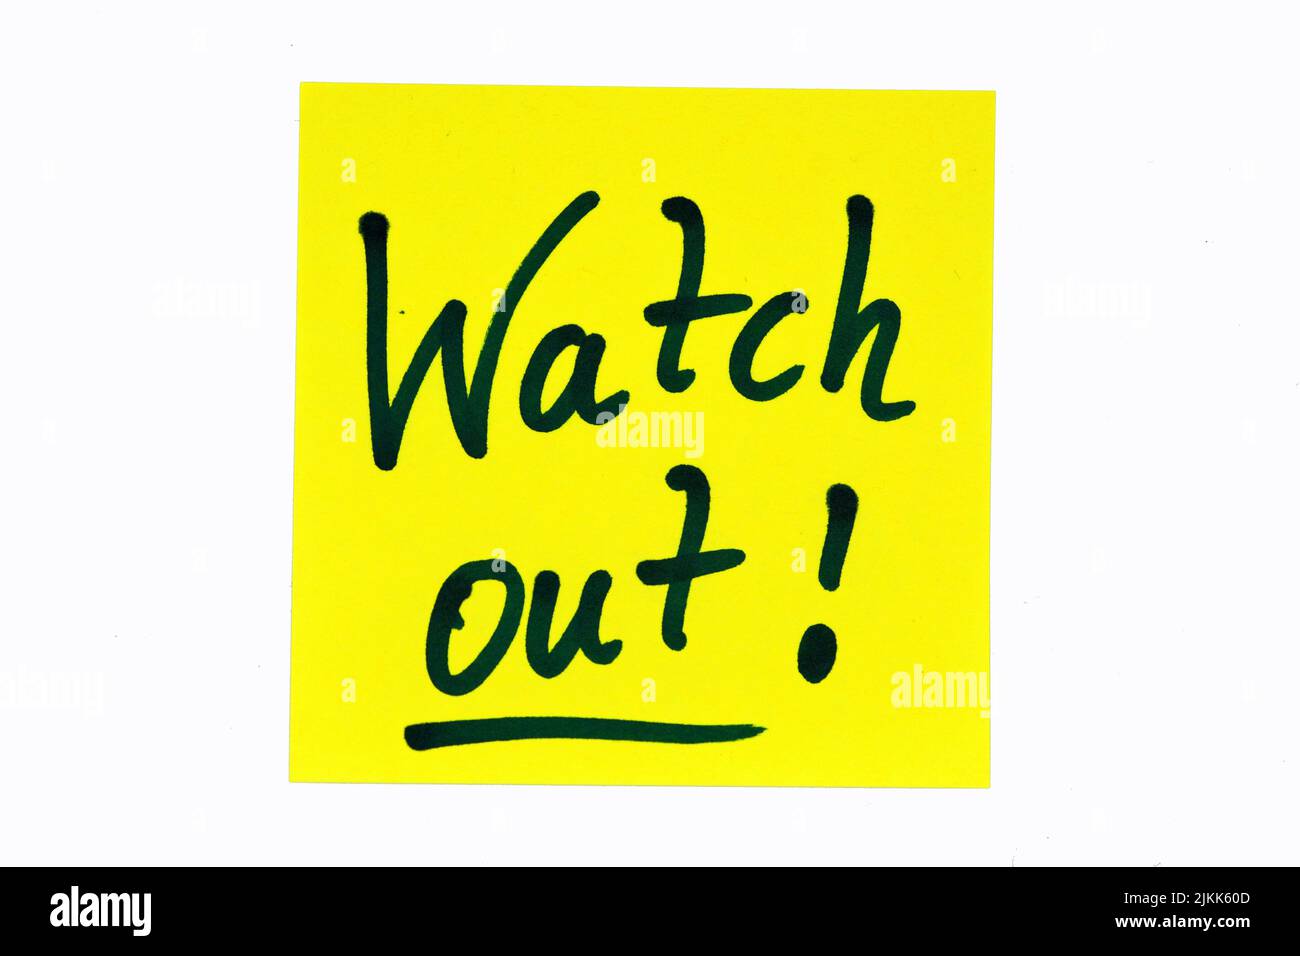 A black colored motivational quote saying 'Watch out!' on a yellow note Stock Photo